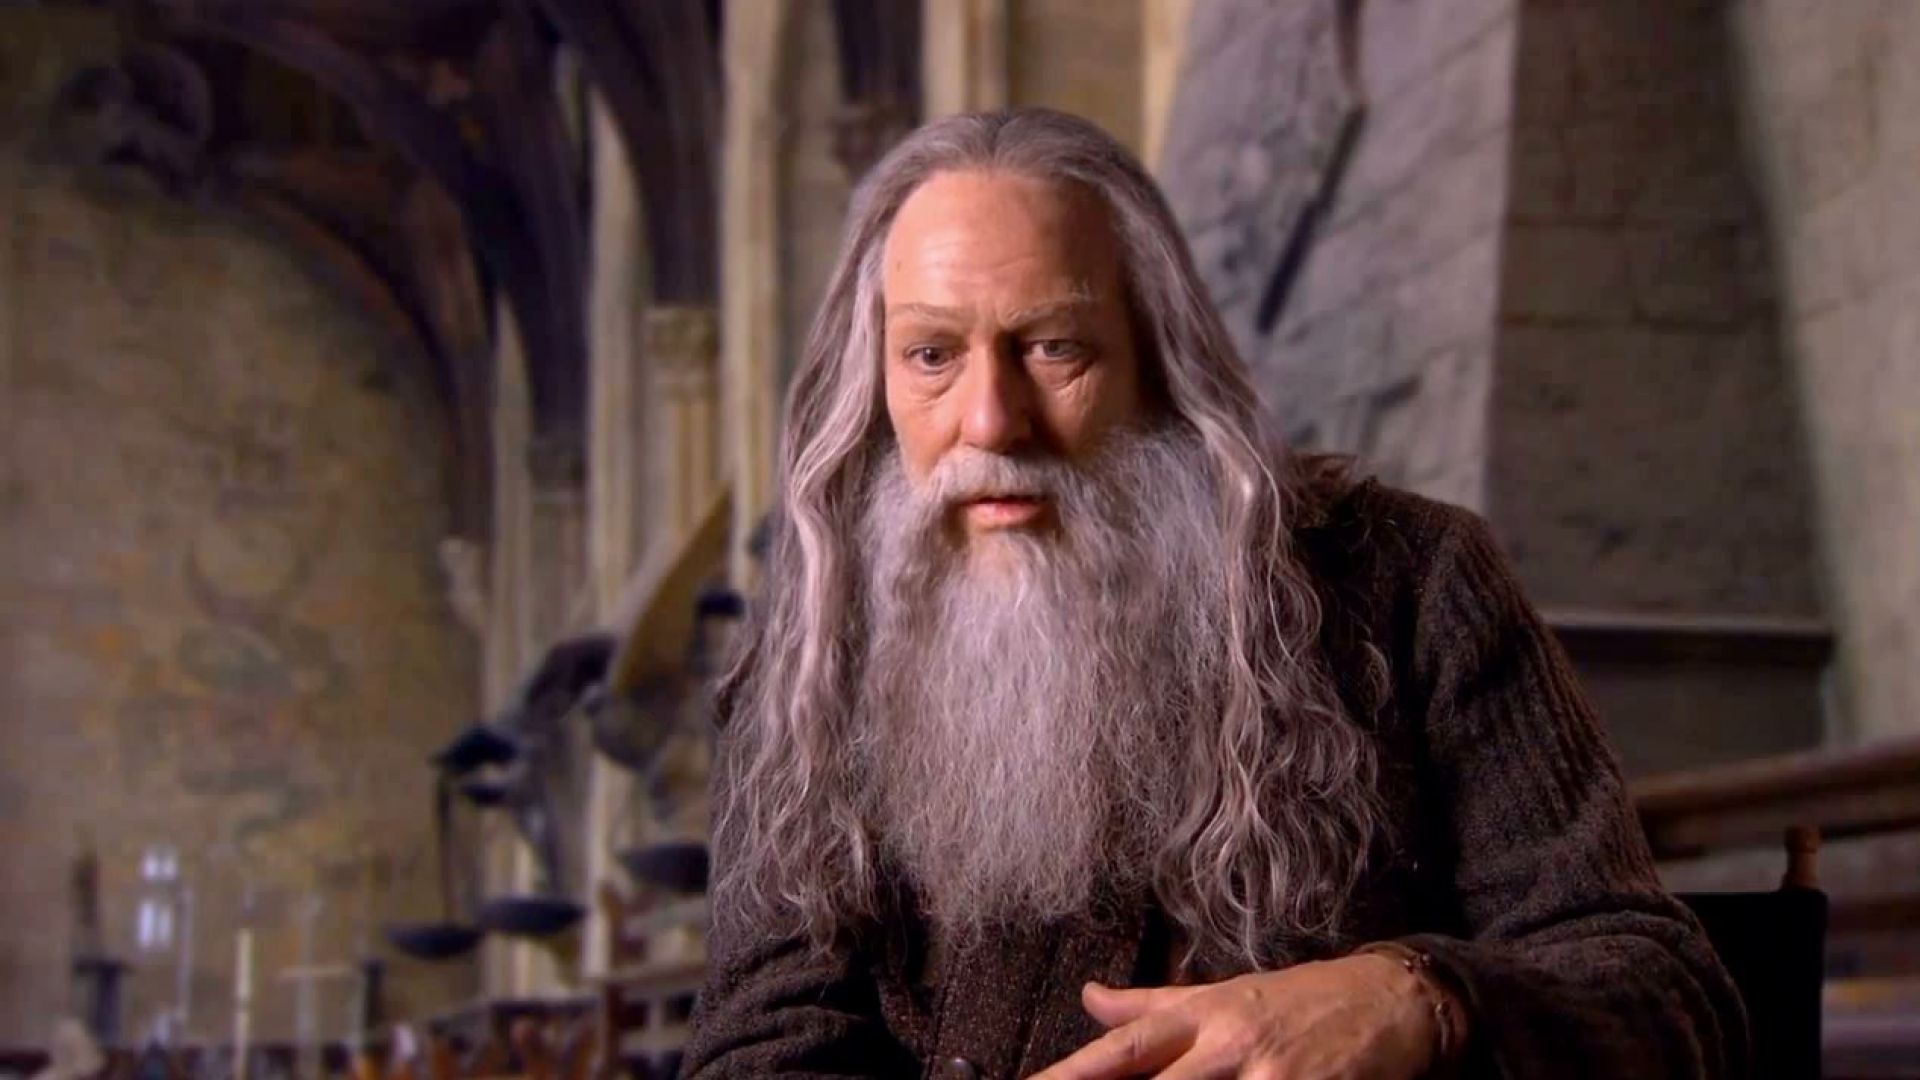 Ciaran Hinds on playing Aberforth Dumbledore in the last Harry Potter